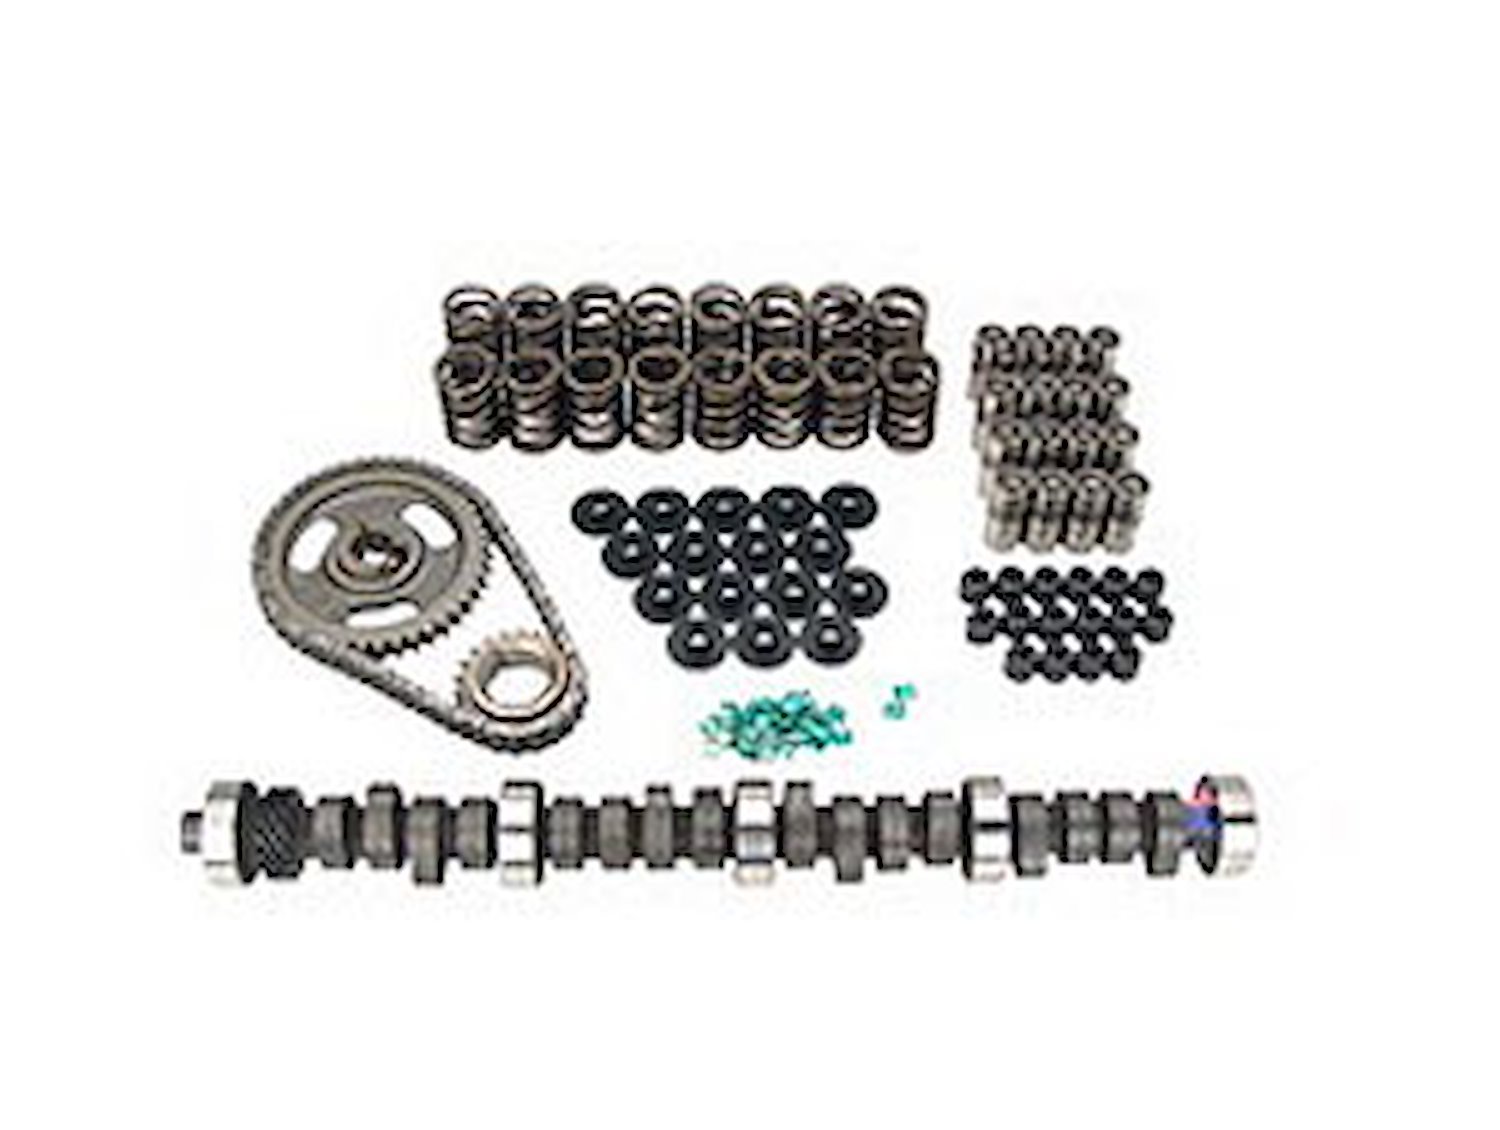 Xtreme Energy 256H Hydraulic Flat Tappet Camshaft Complete Kit Lift .487"/.493" Duration 256°/268° RPM Range 1200-5200